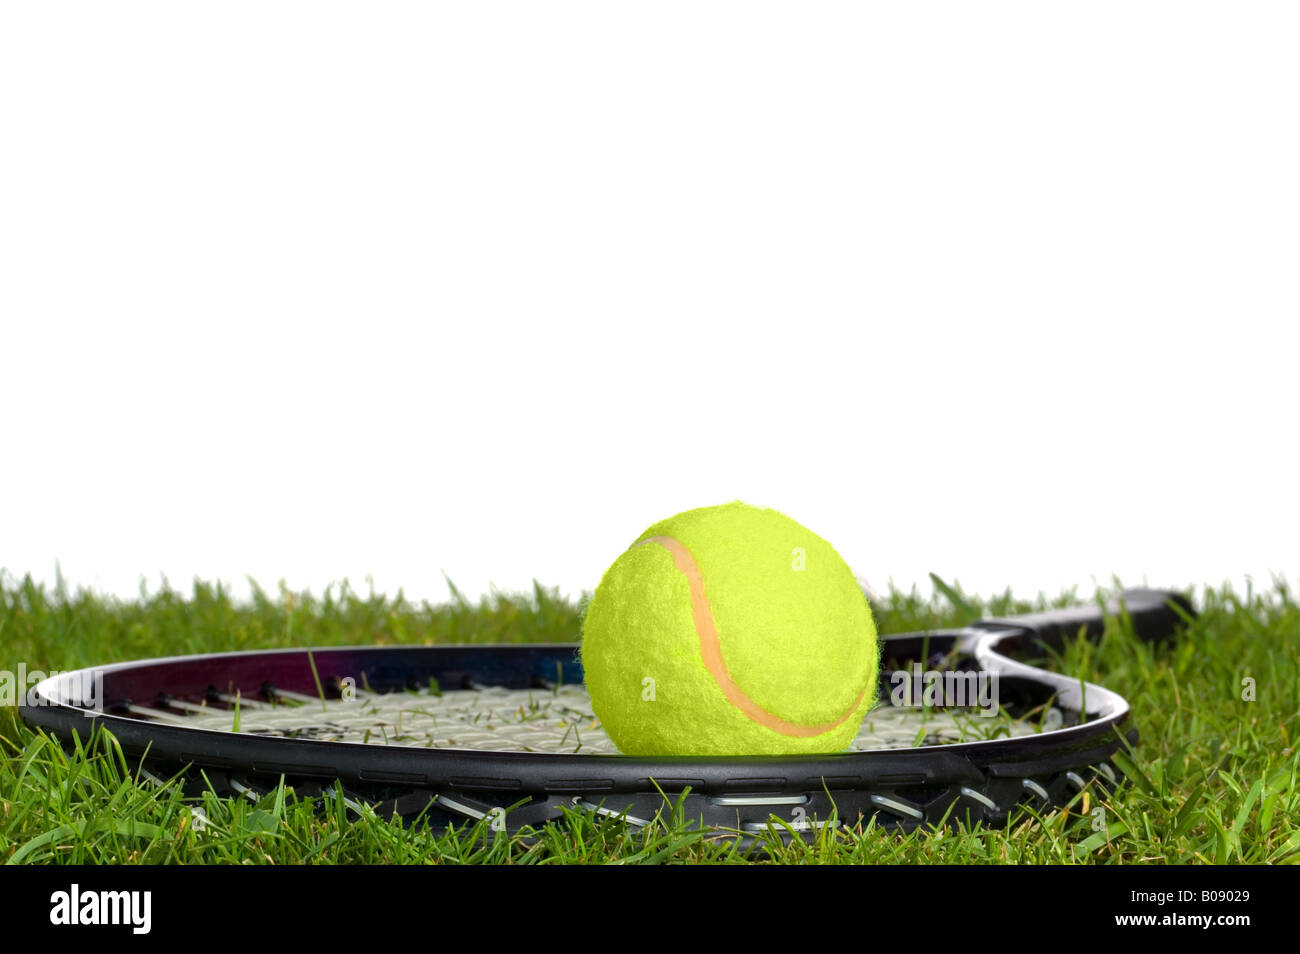 Surface level shot of a tennis racket and ball on real grass Stock Photo